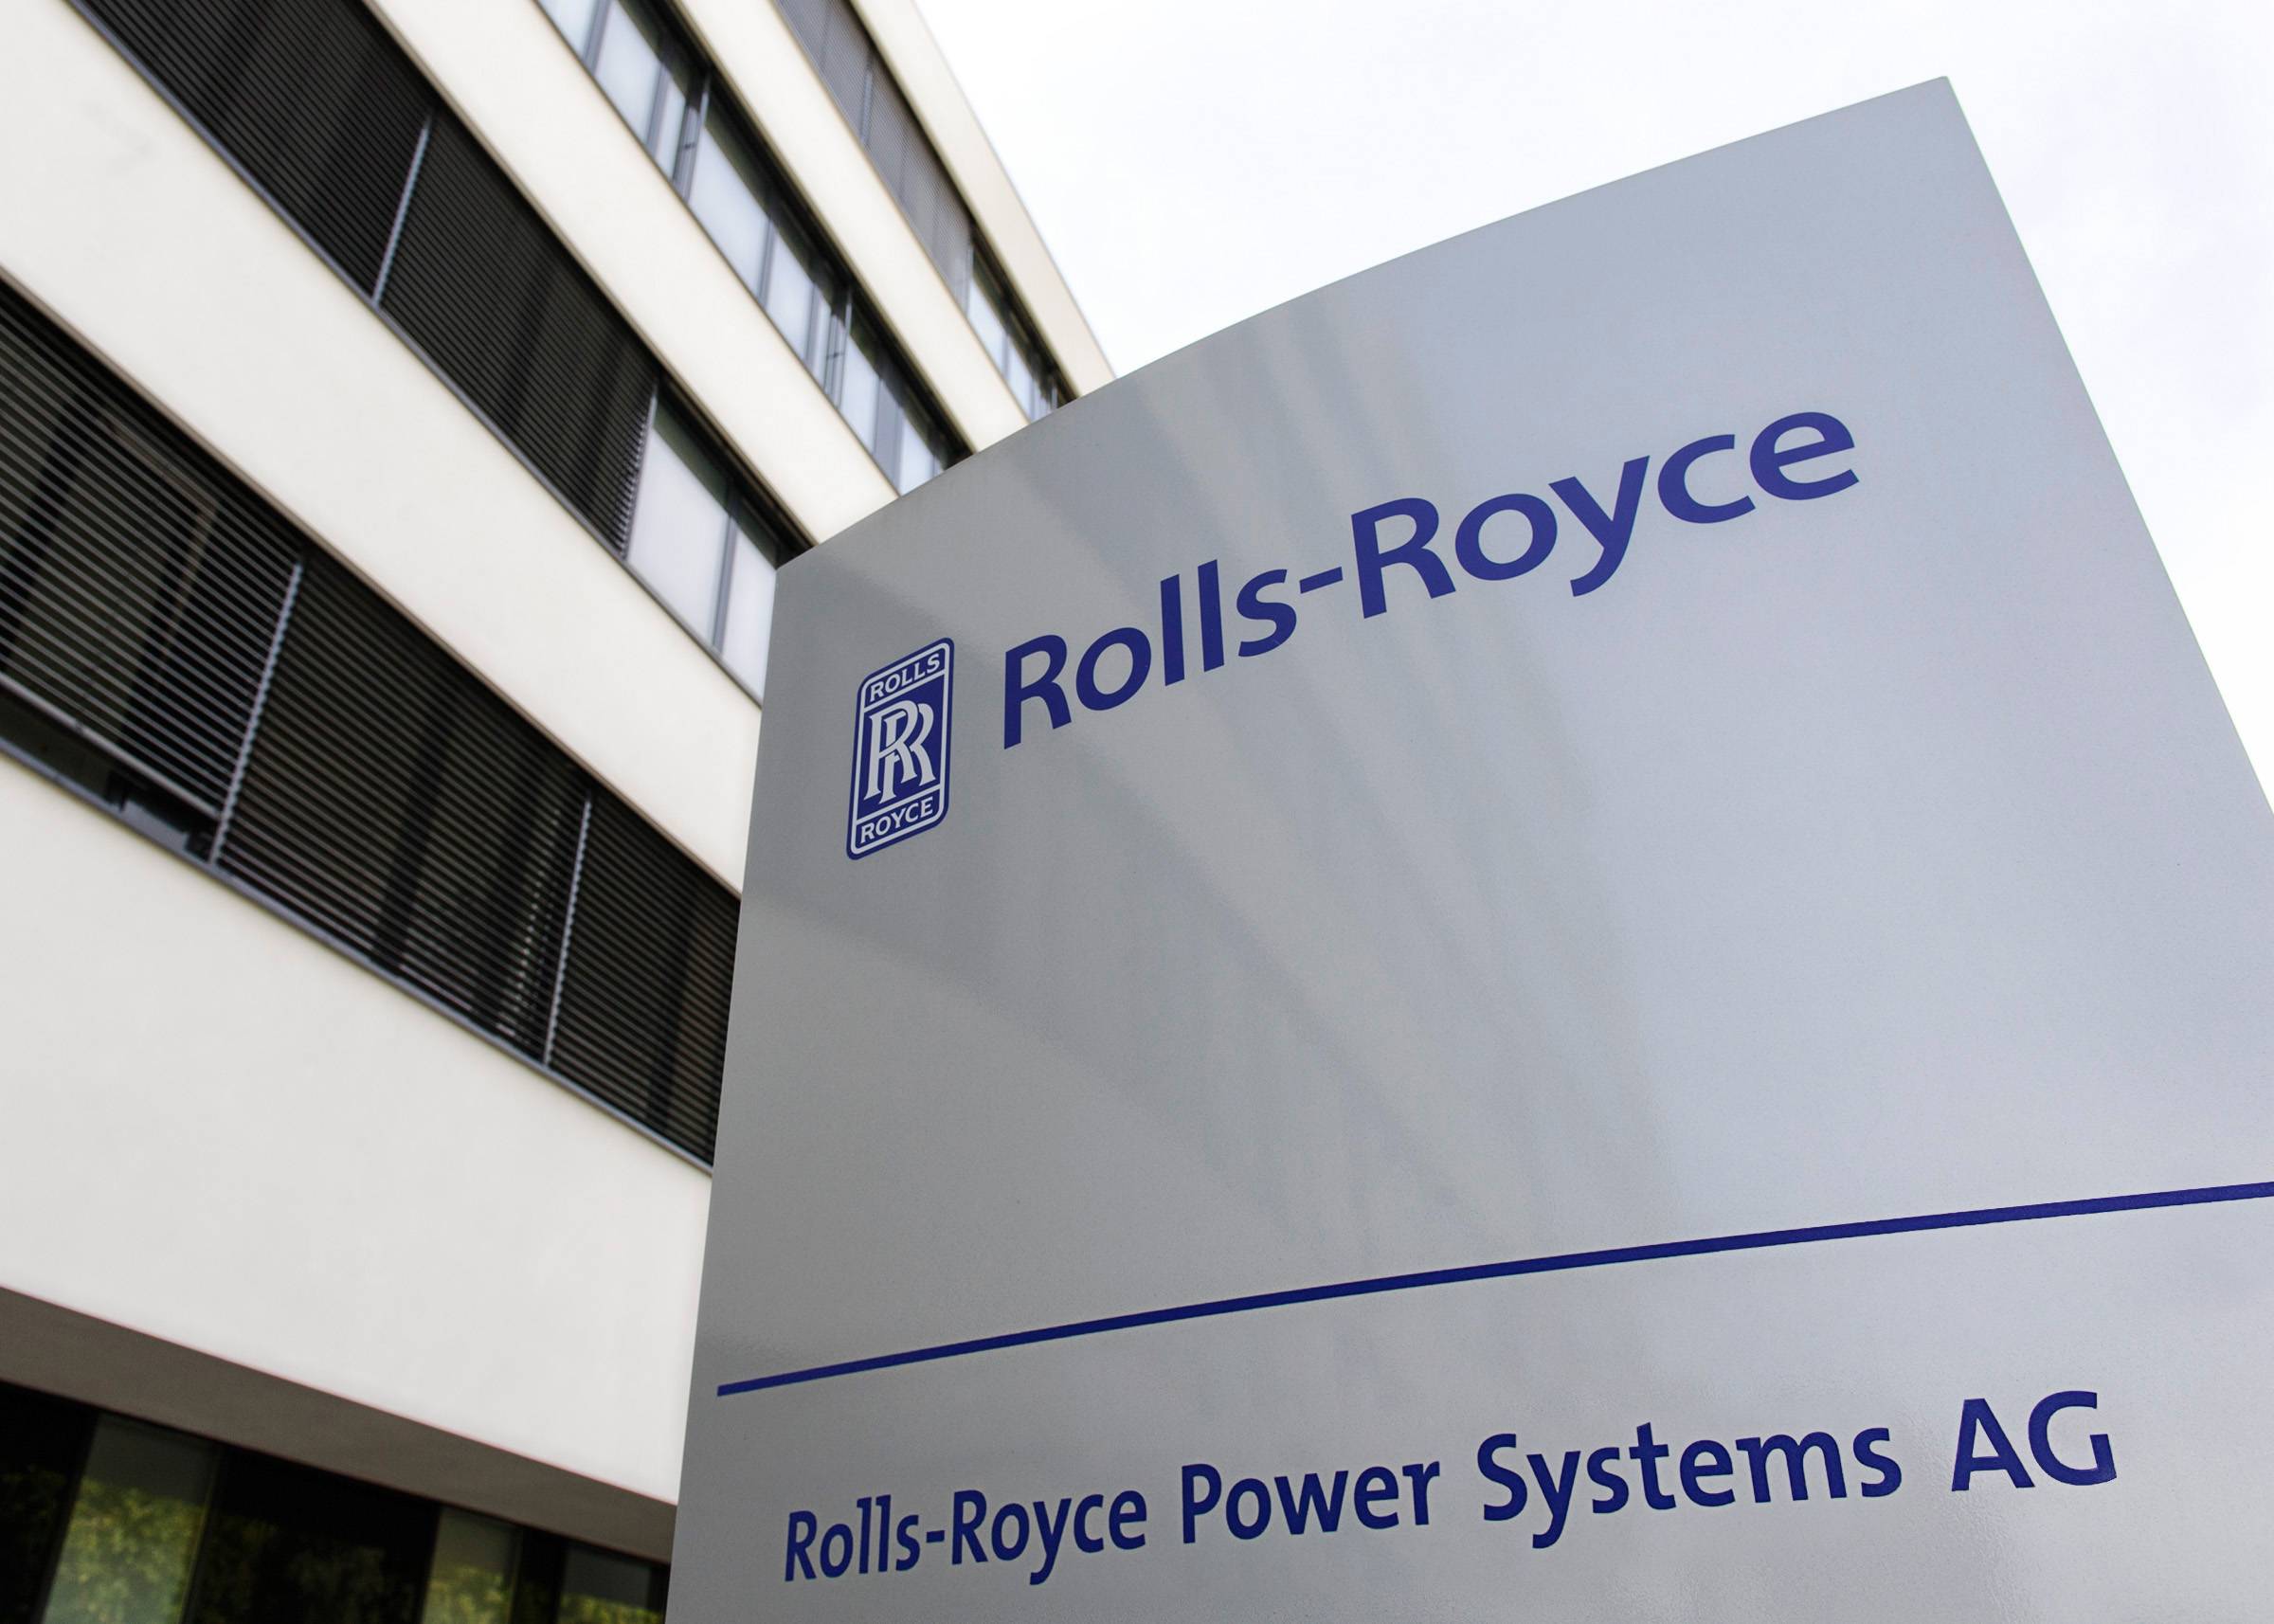 RollsRoyce sets up infrastructure for production and use of green hydrogen